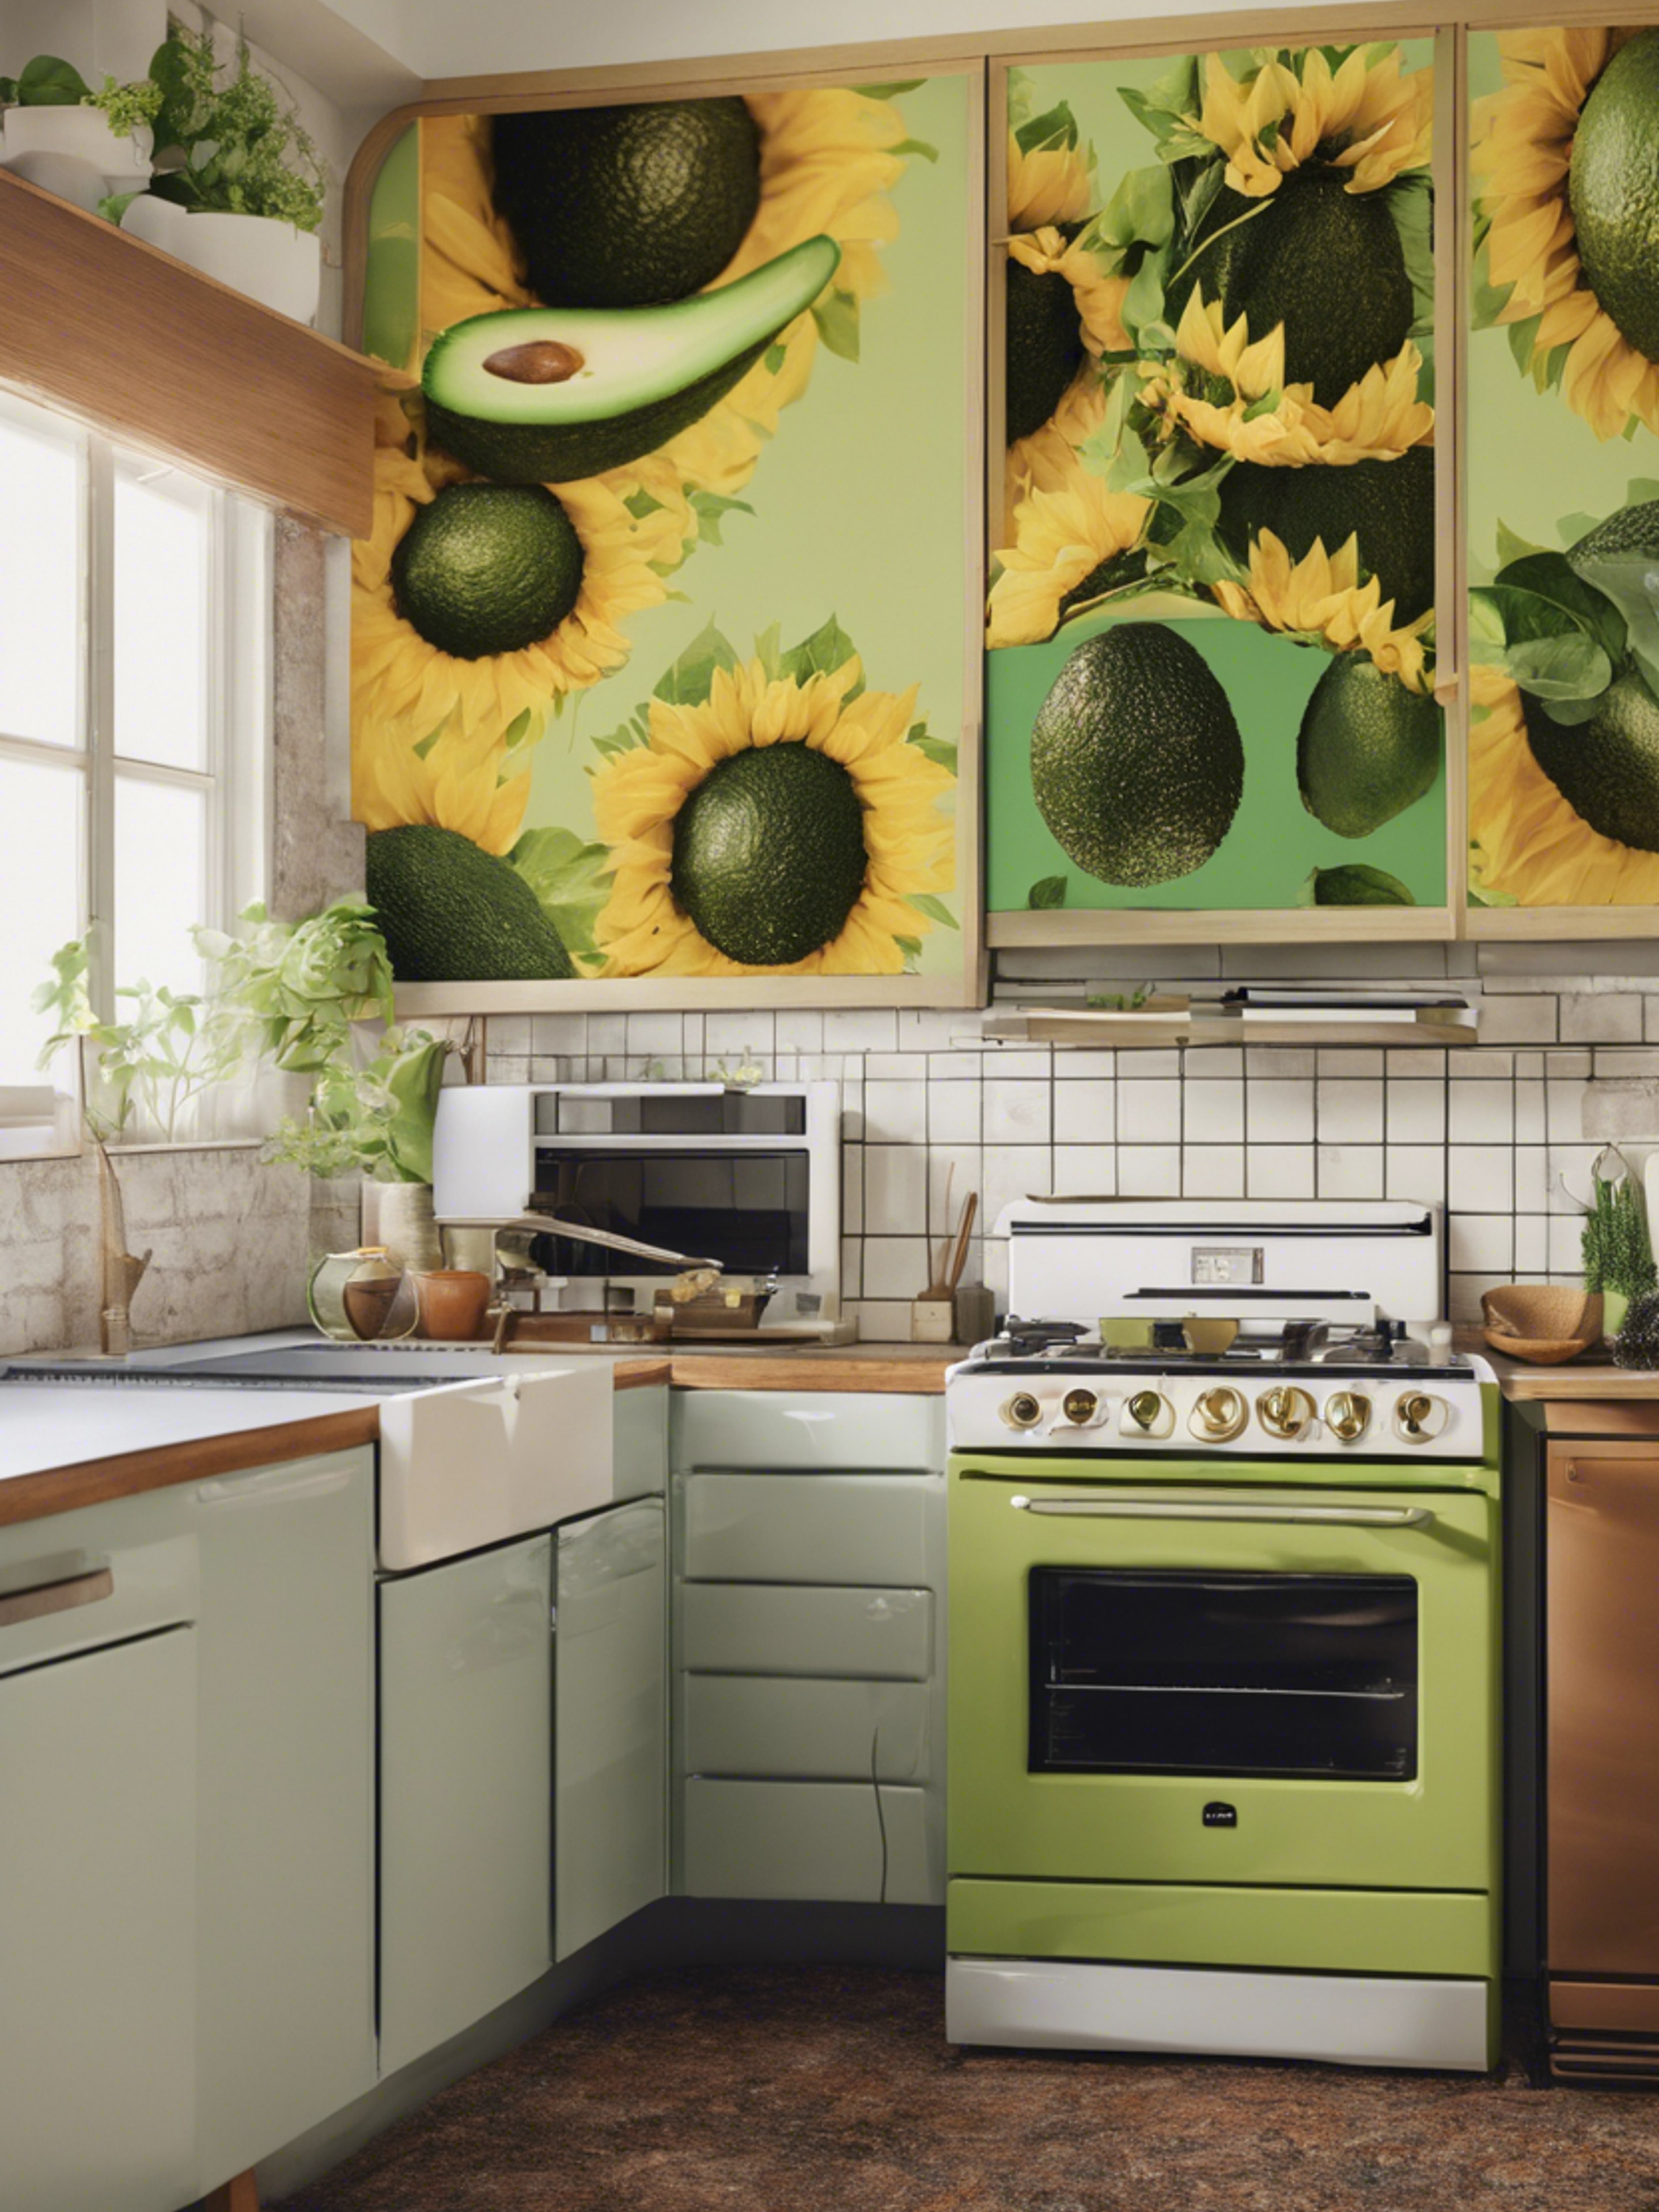 A 70s kitchen with avocado green appliances and oversized sunflower prints Wallpaper[58674ee3cd464da7b0a1]